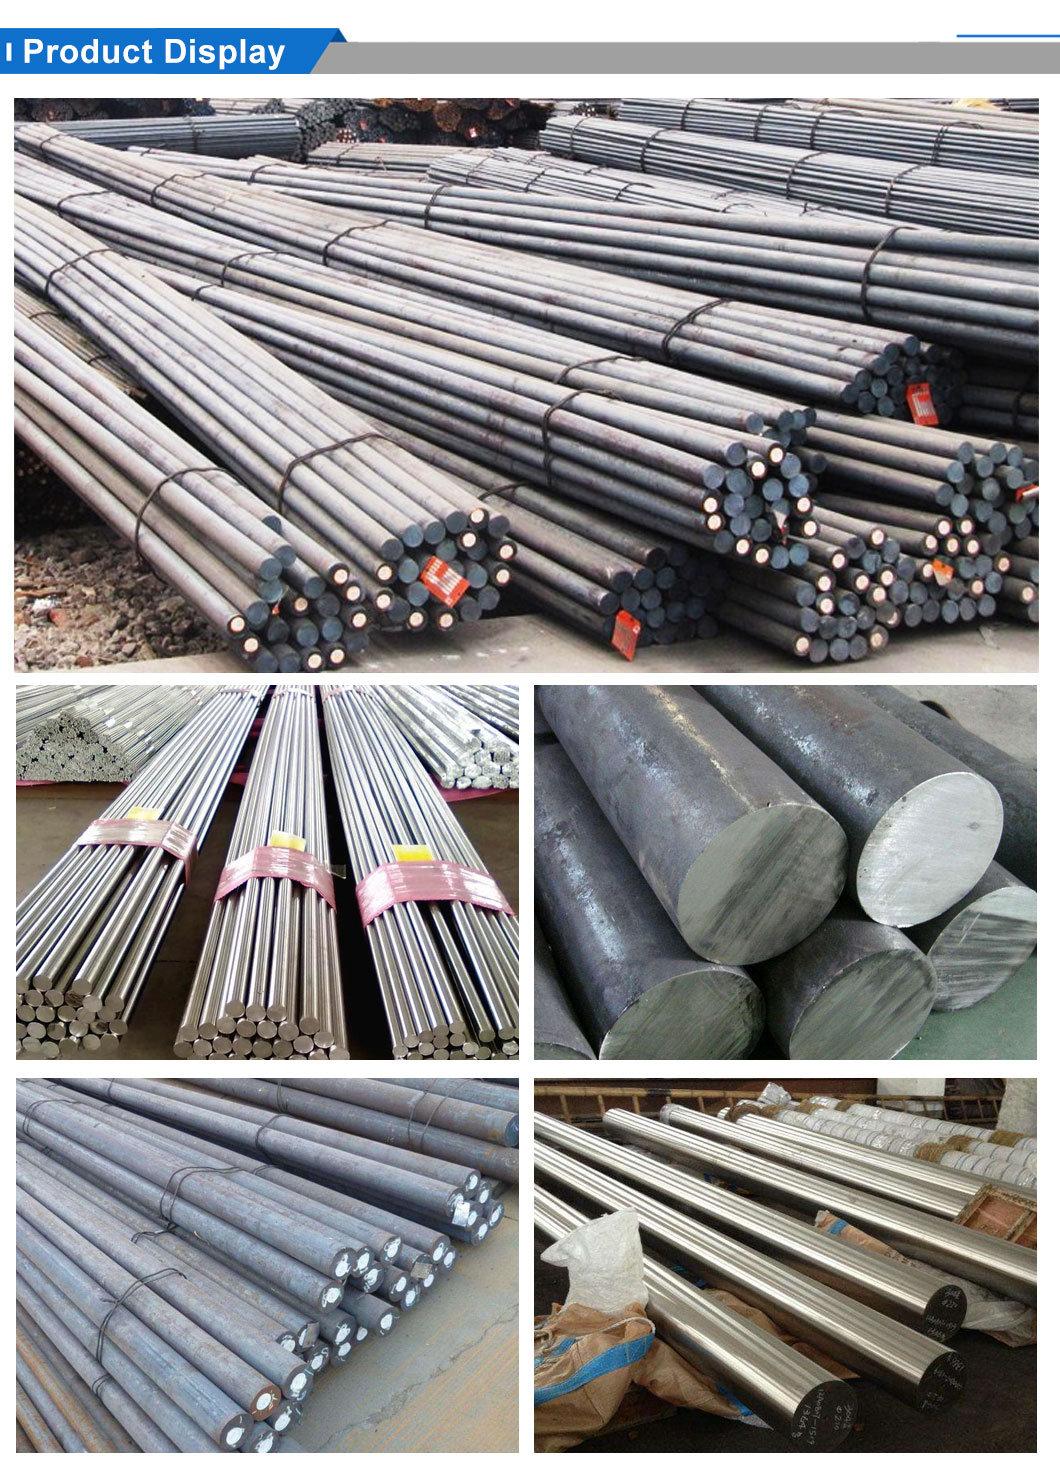 High Quality 440c Stainless Steel Bars